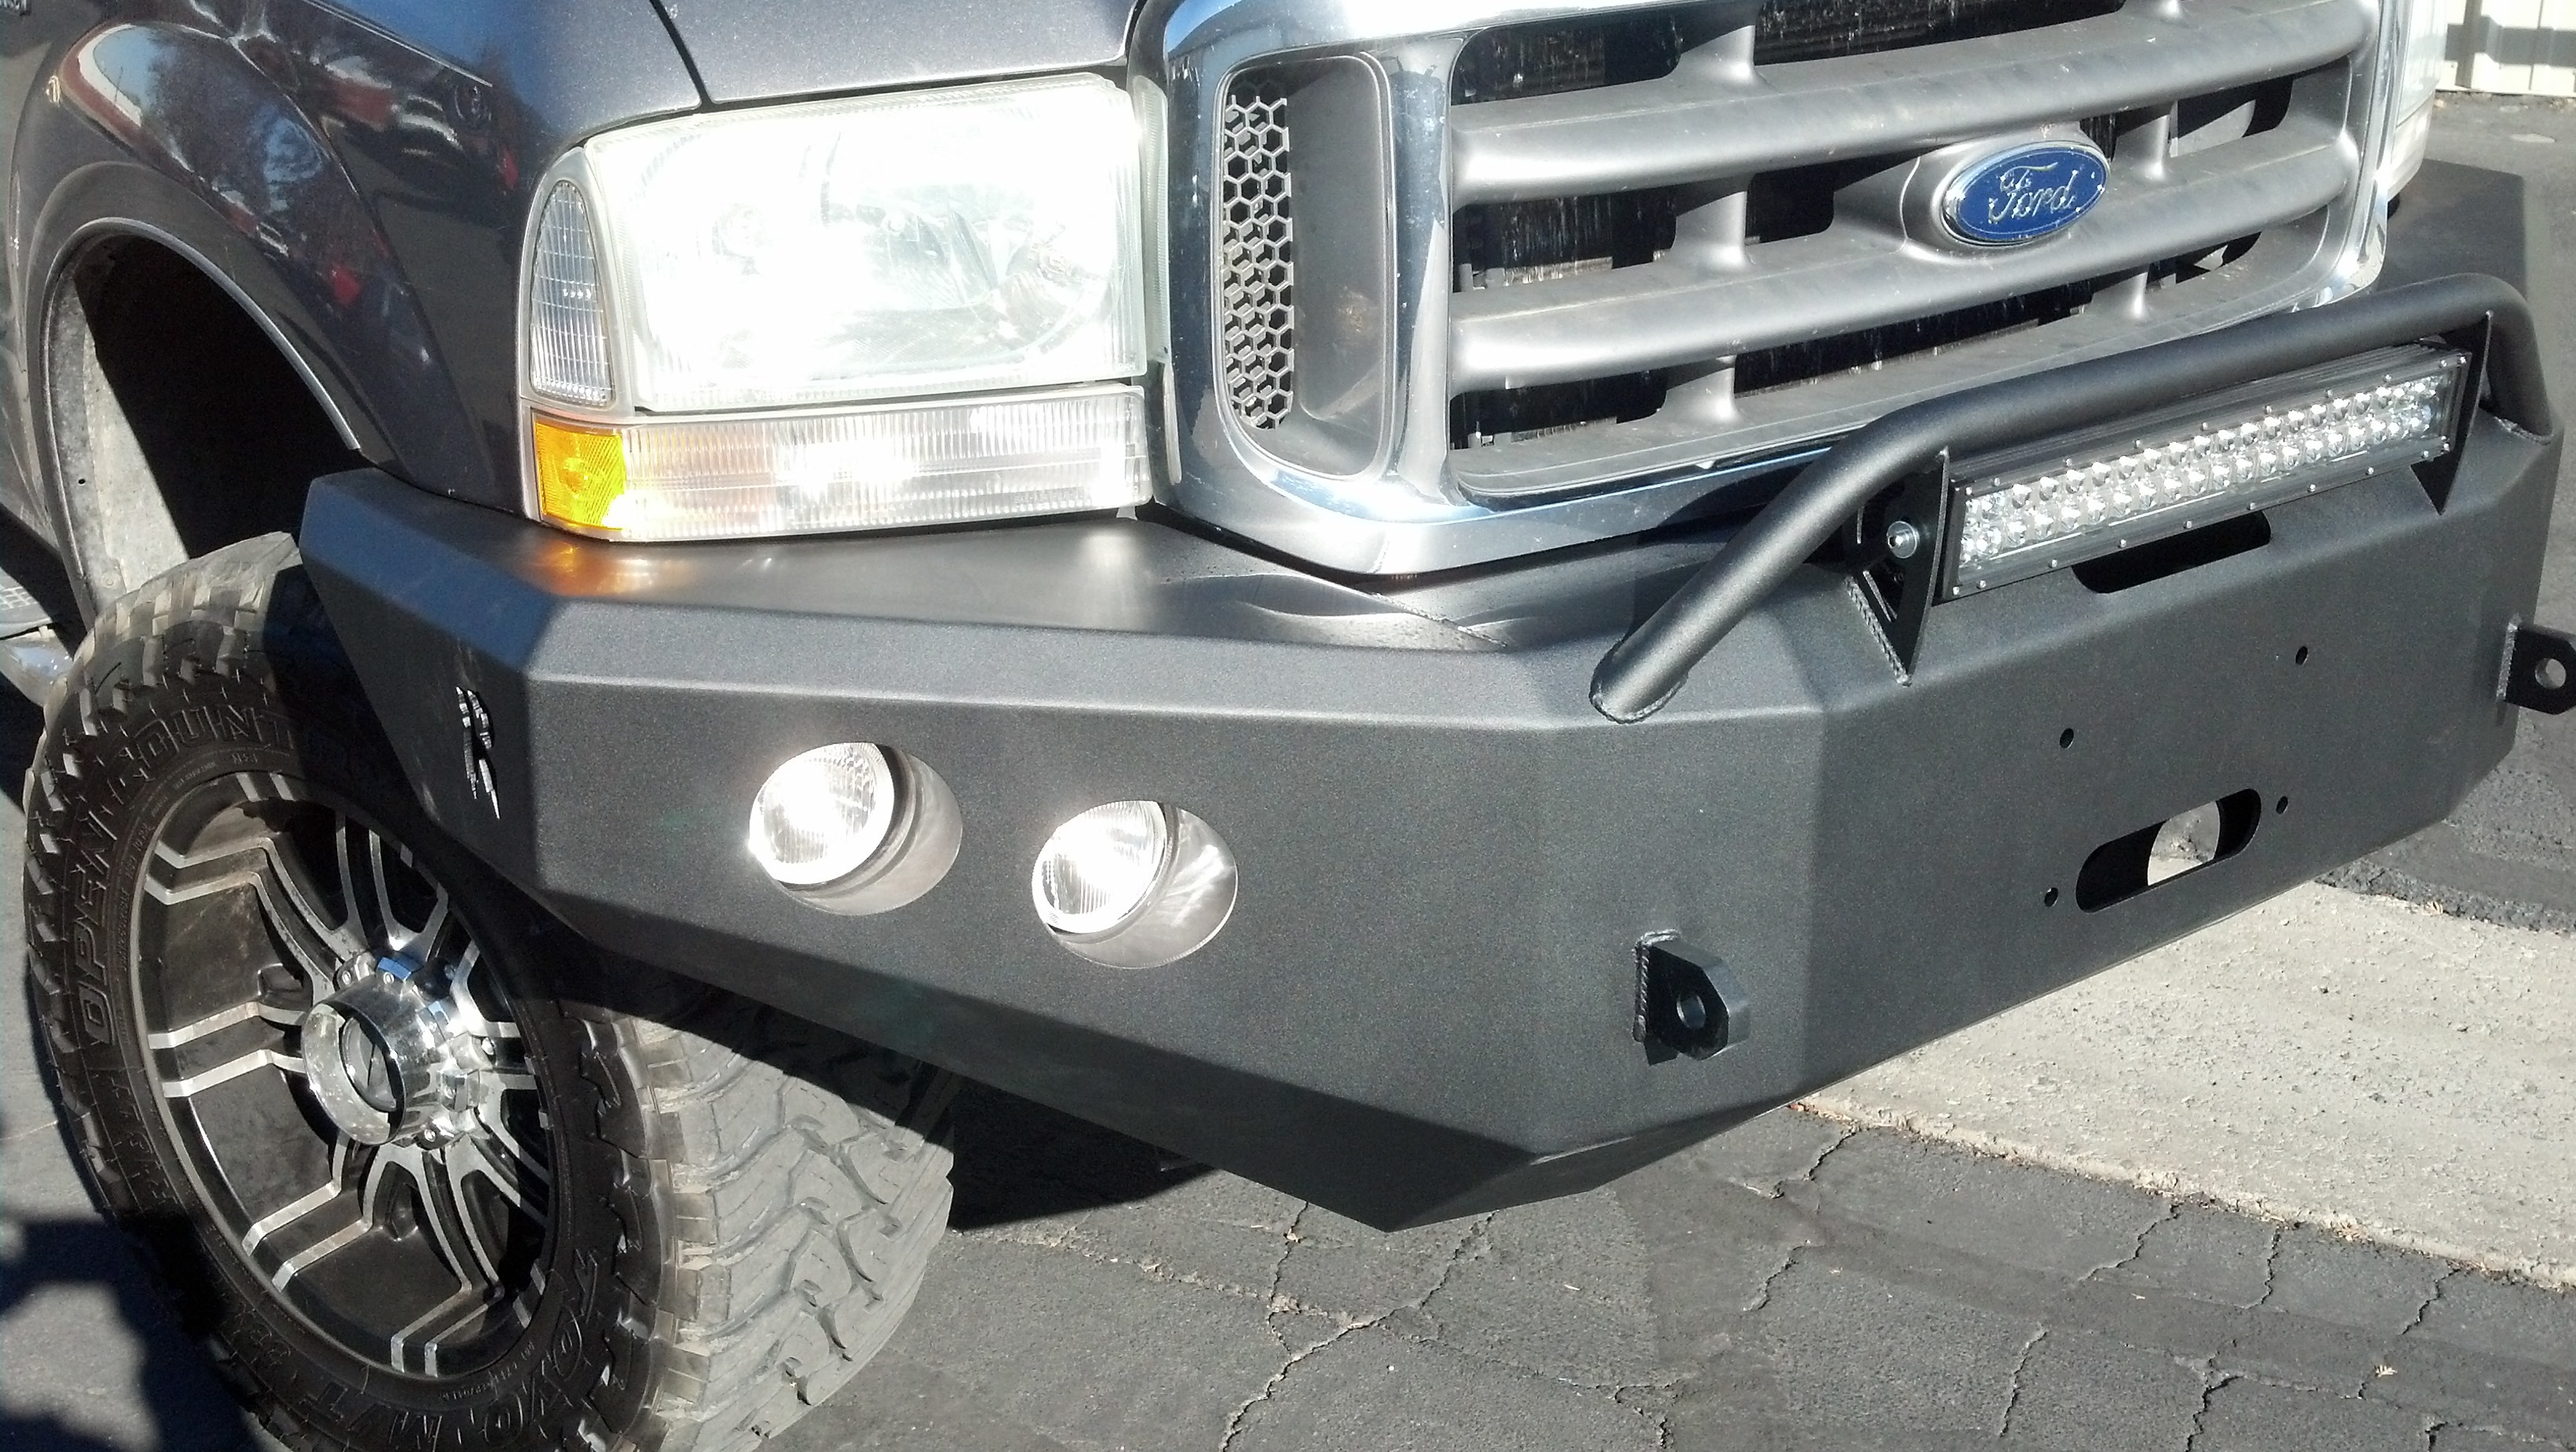 2004 Ford superduty front bumper